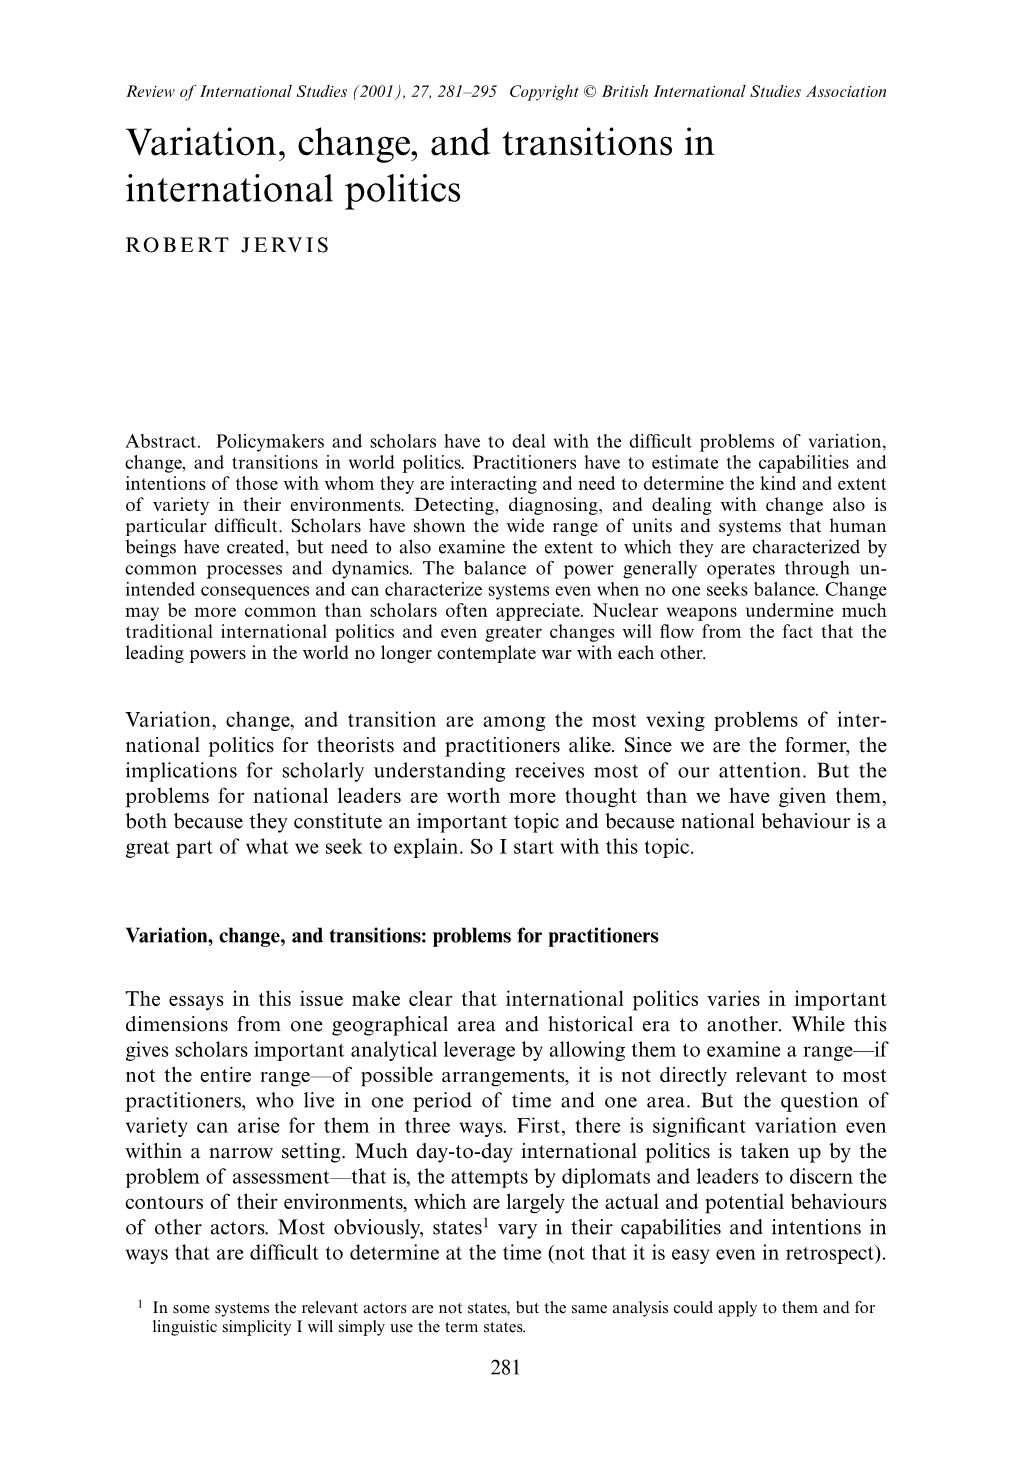 Variation, Change, and Transitions in International Politics